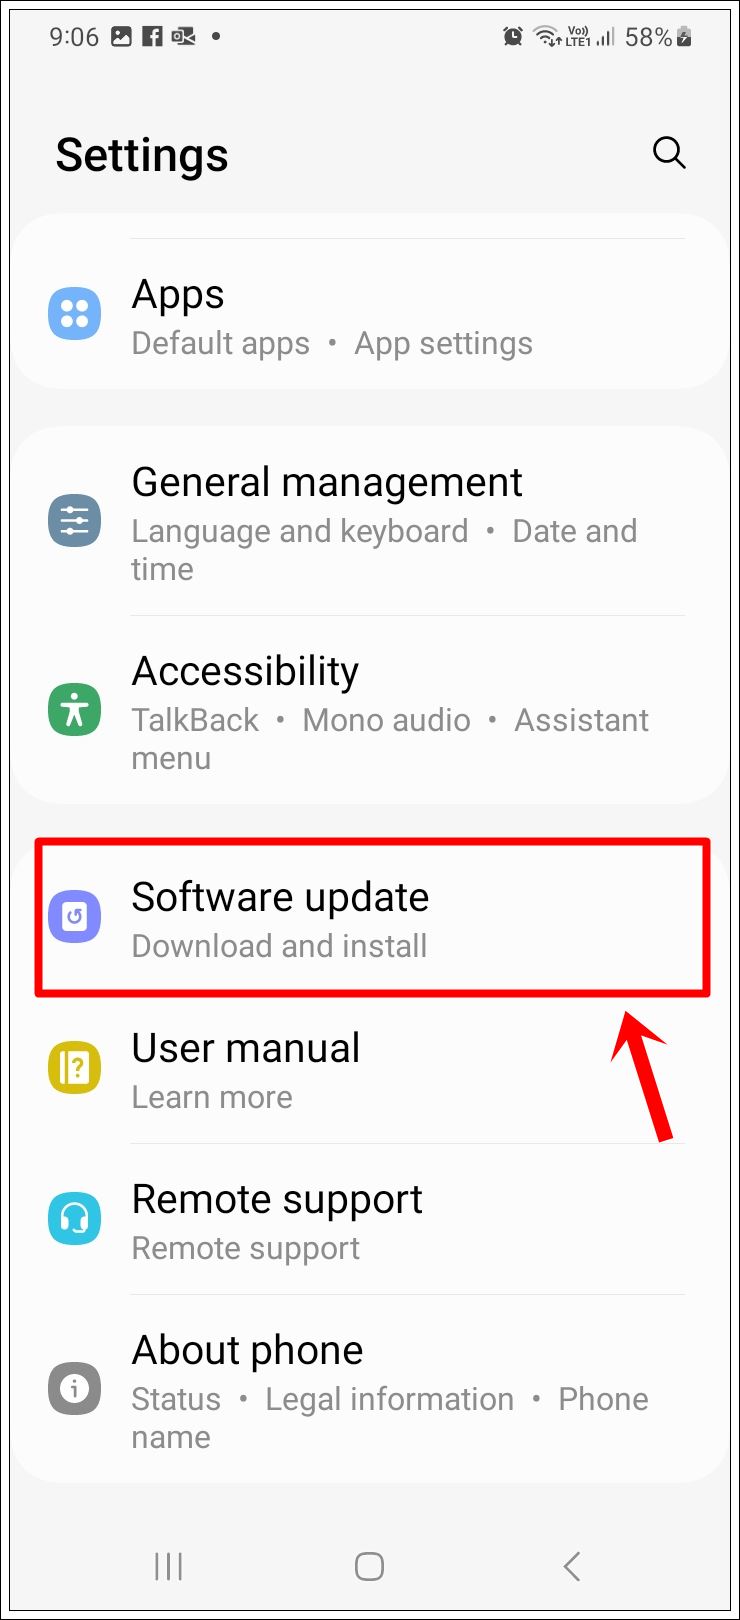 This image displays a screenshot of a Samsung Galaxy phone, specifically showcasing the 'Settings' page, with emphasis on the highlighted 'Software Update' option.